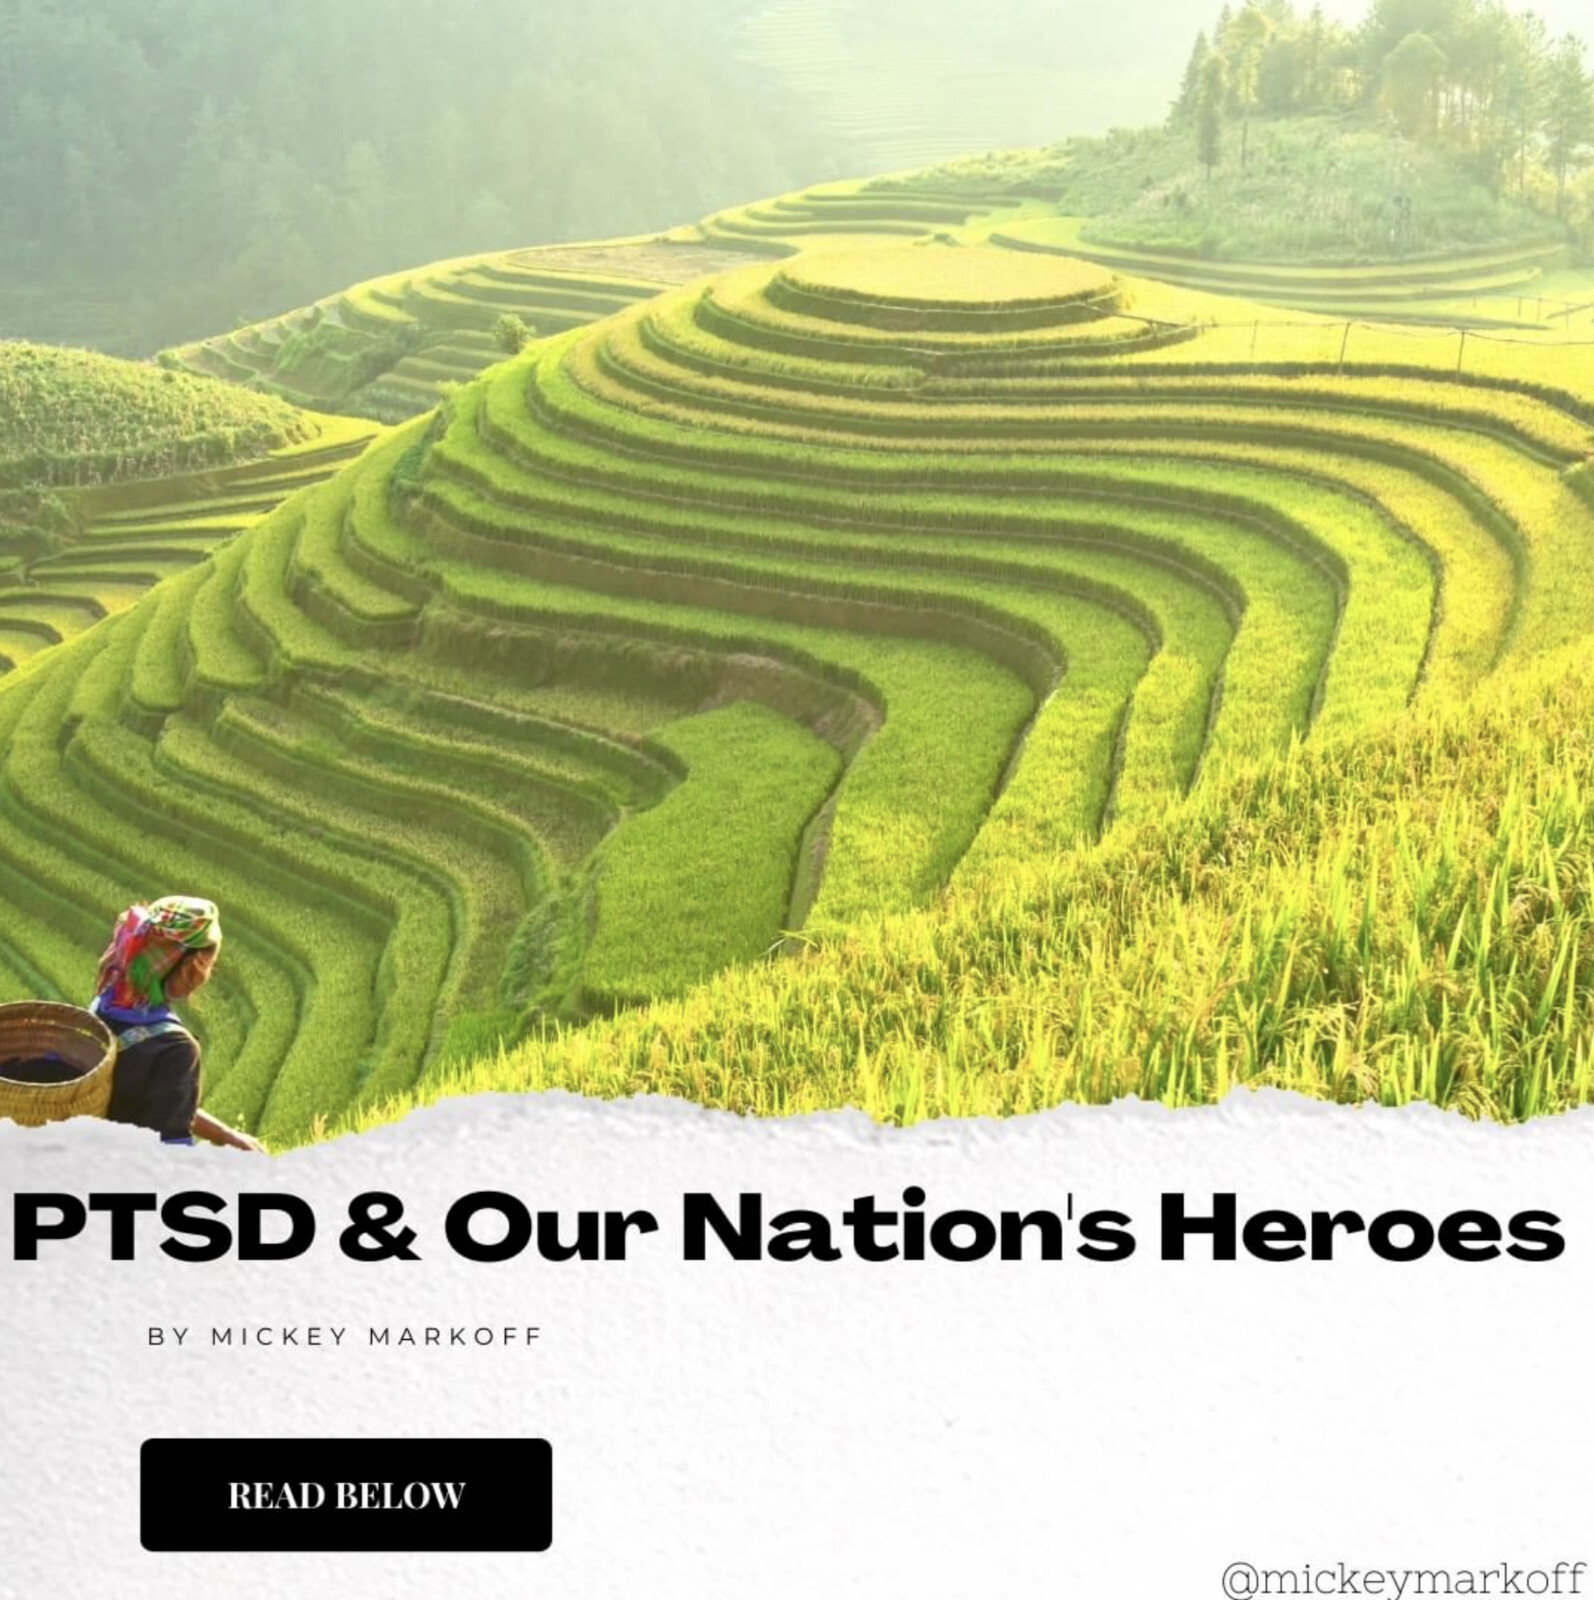 Mickey Markoff - Air and Sea Show Executive Producer - “PTSD &amp; Our Nation’s Heroes”
